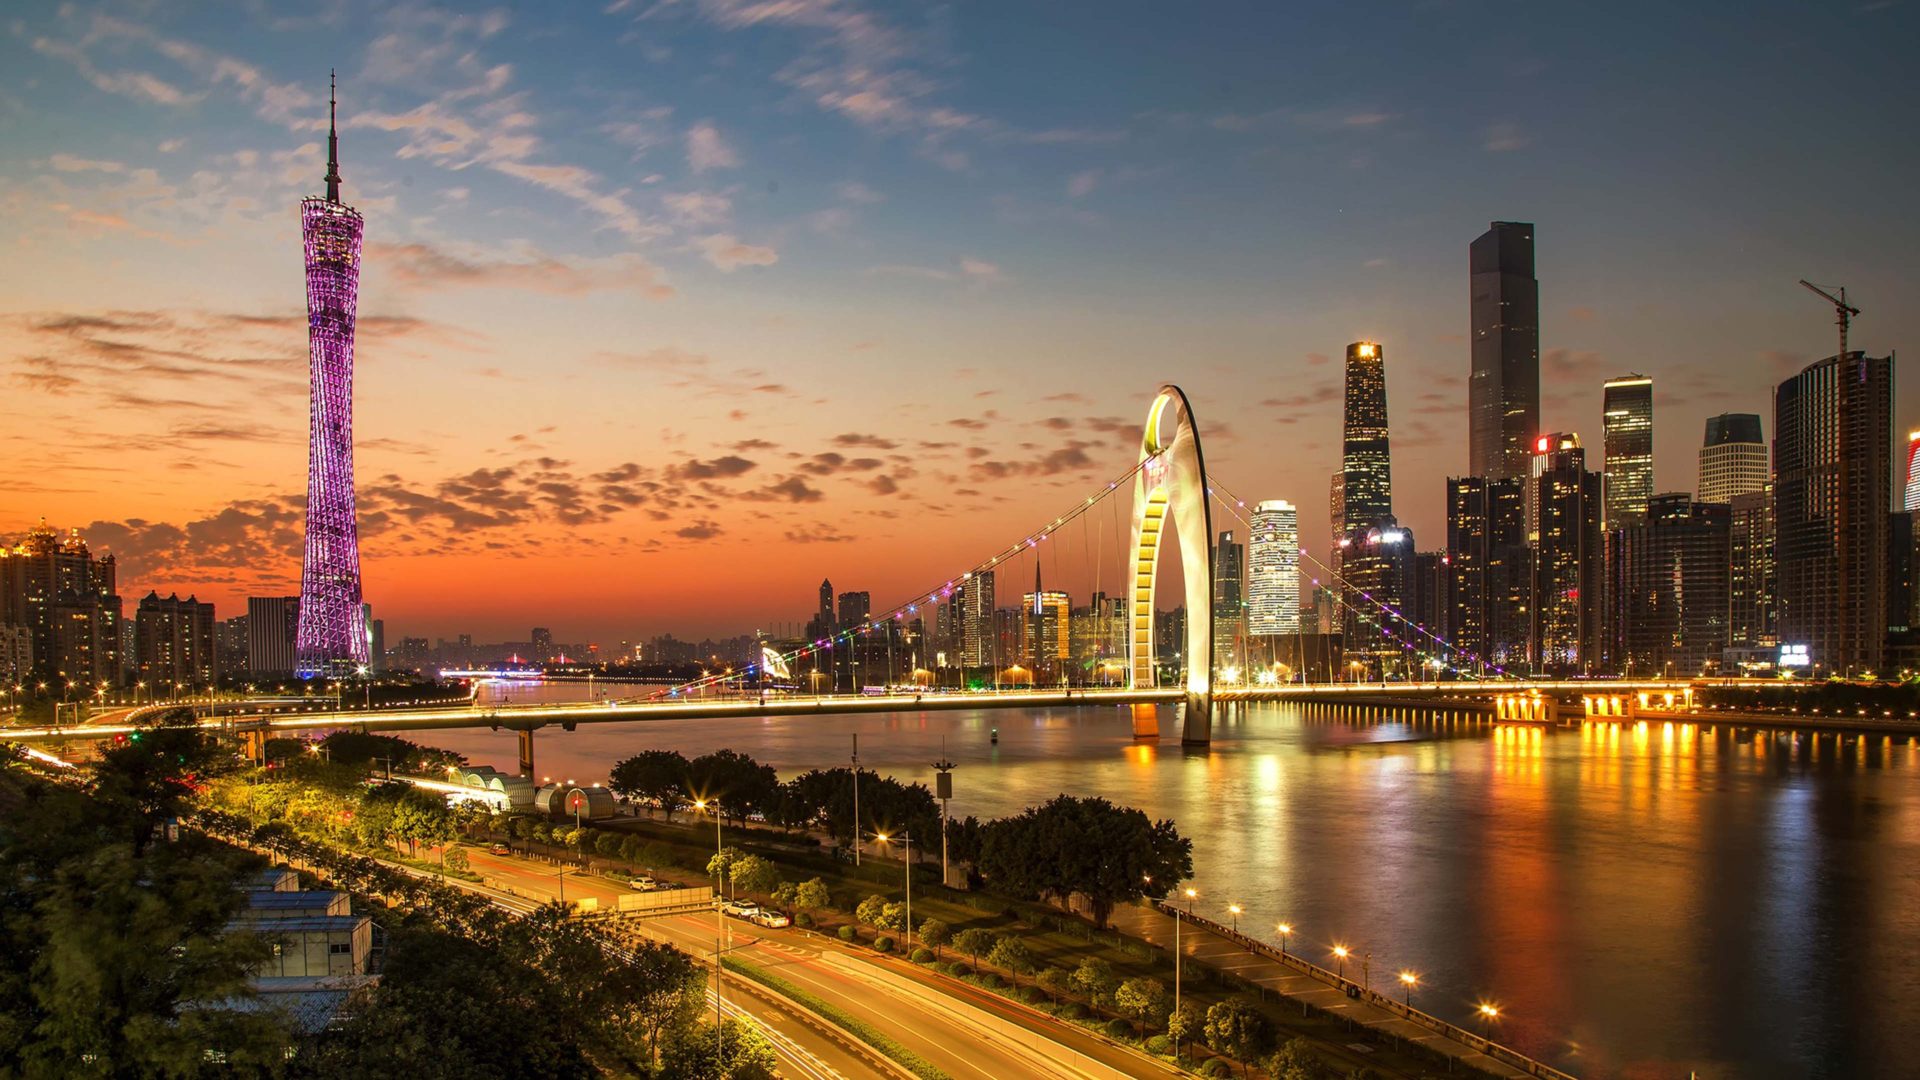 City in china guangzhous at sunset cityscape pearl river k ultra hdk ultra hd wallpaper for desktop wallpaper for desktop